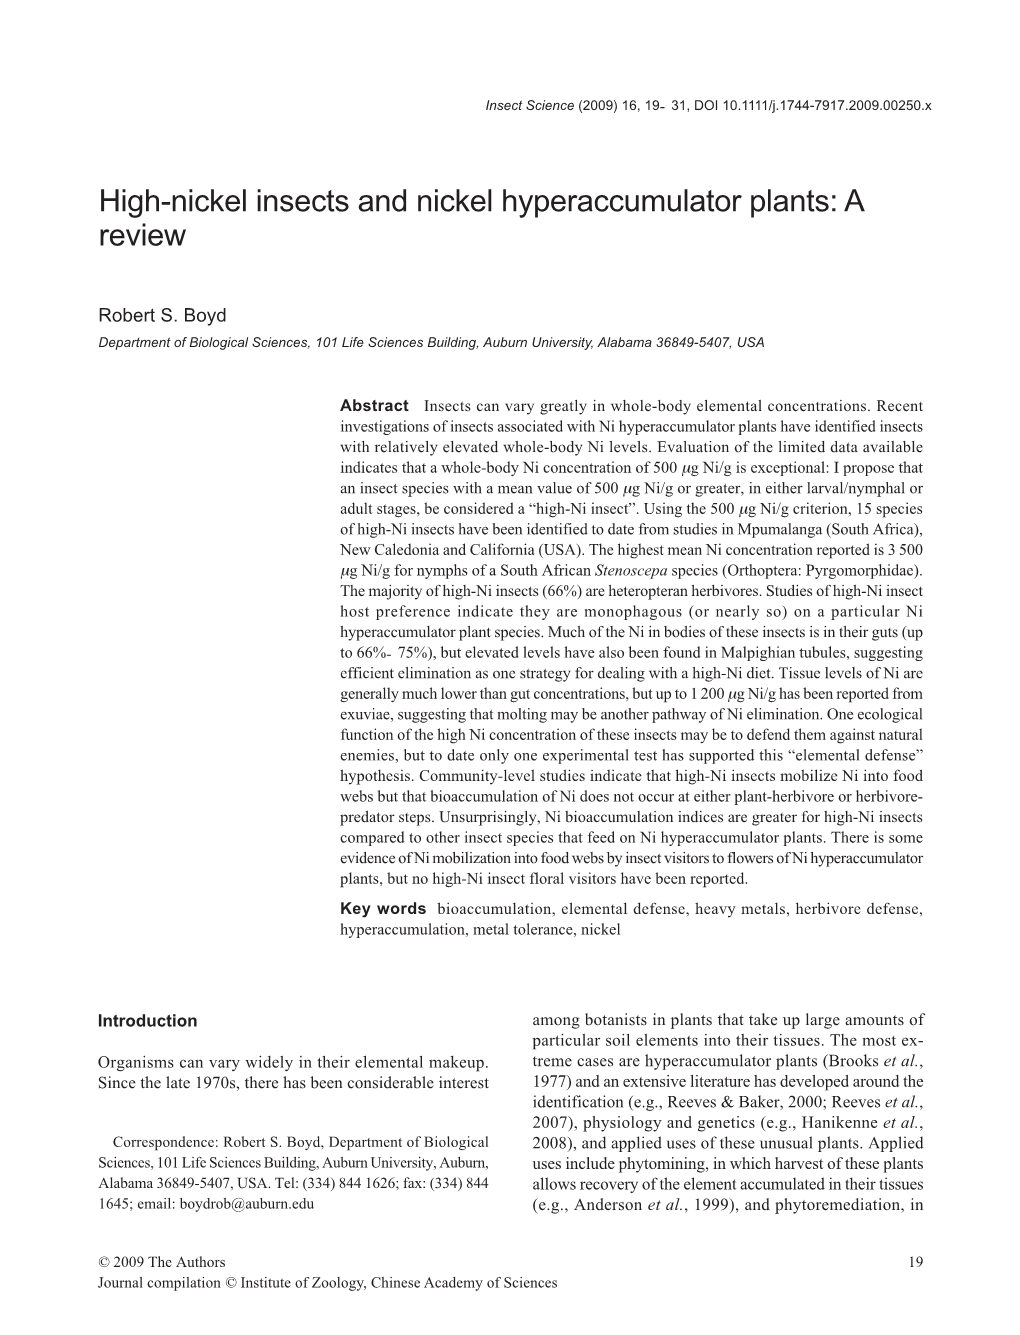 High-Nickel Insects and Nickel Hyperaccumulator Plants: a Review